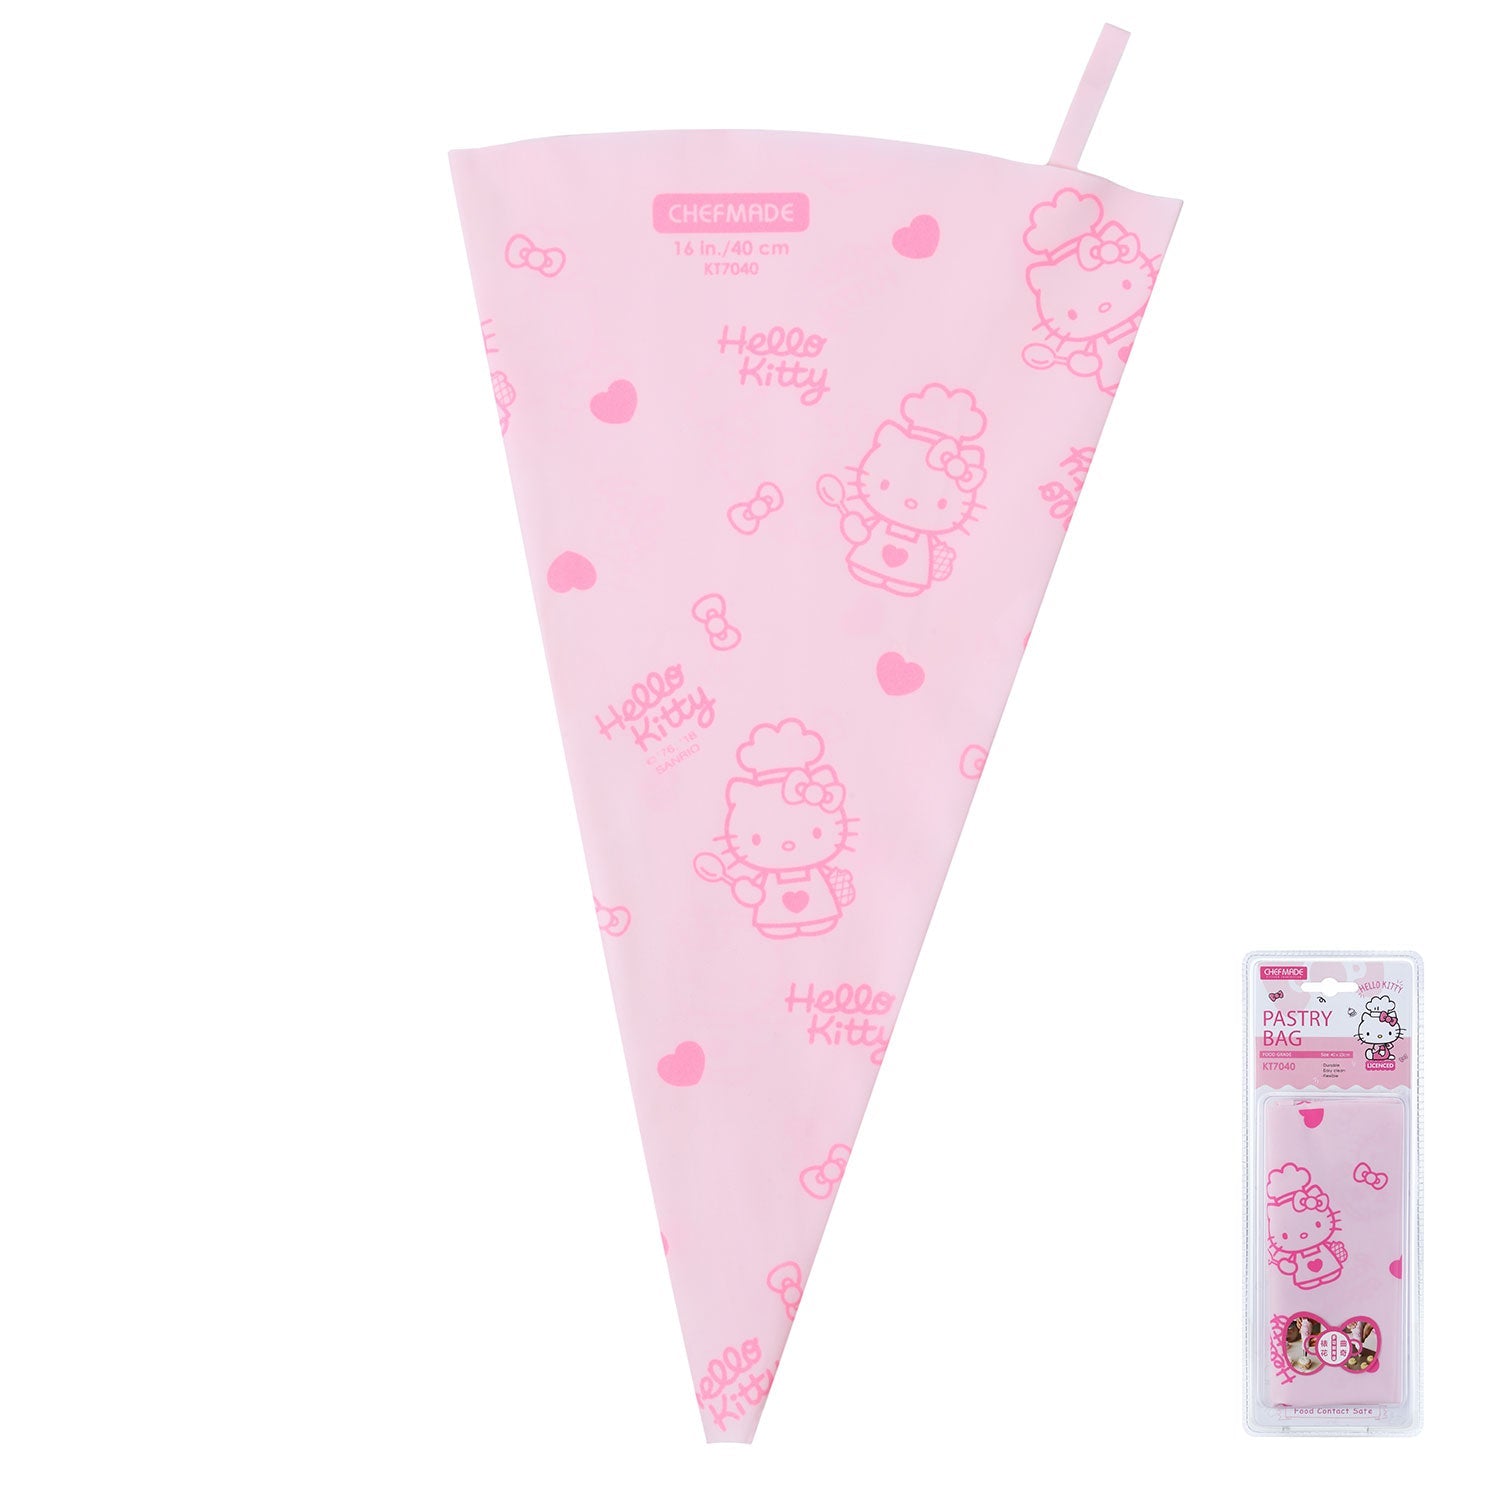 Chefmade學廚KT7040擠花袋16" Hello Kitty Reusable Pastry Bag